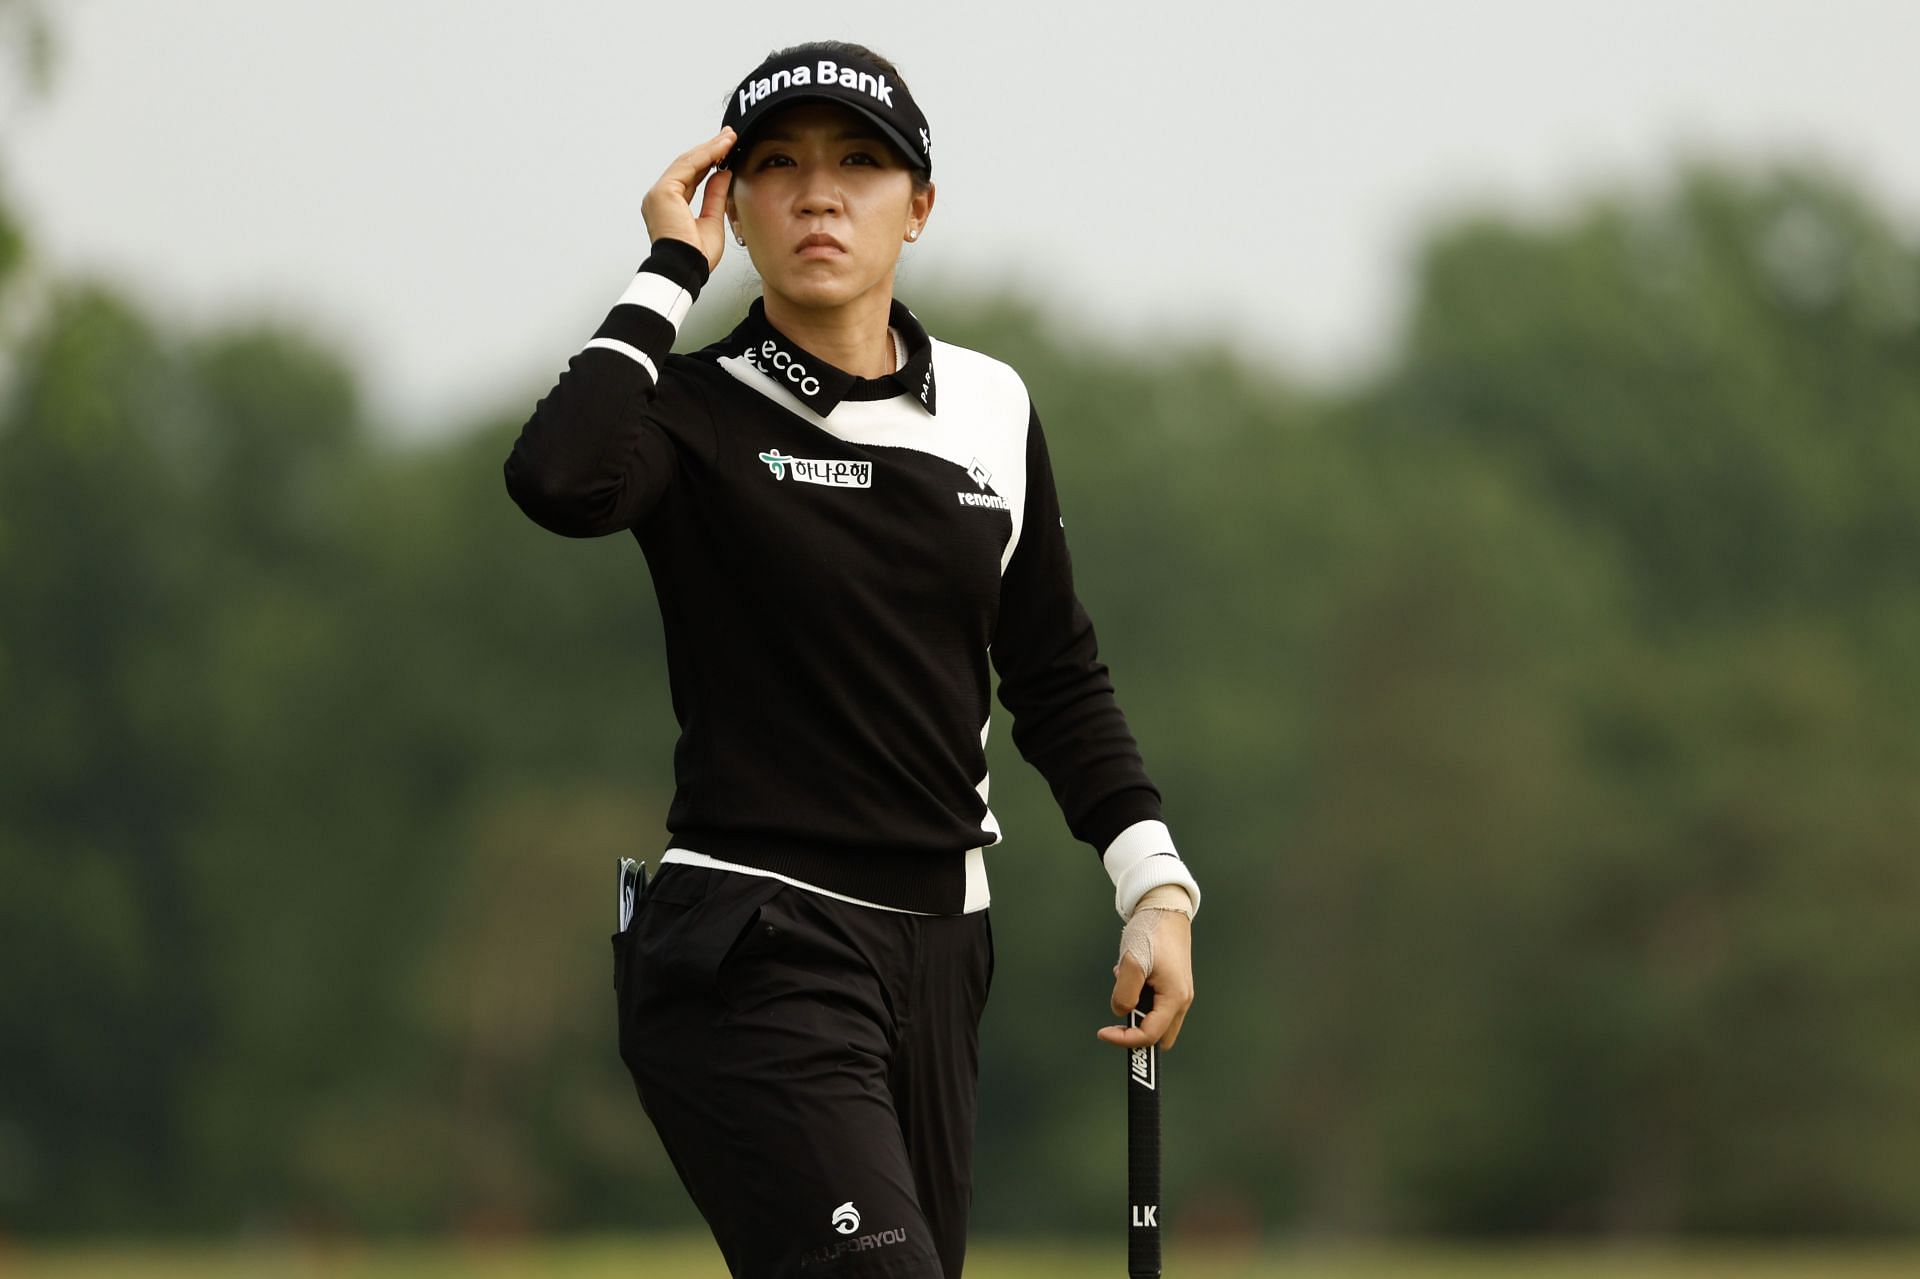 Lydia Ko predicted difficult conditions